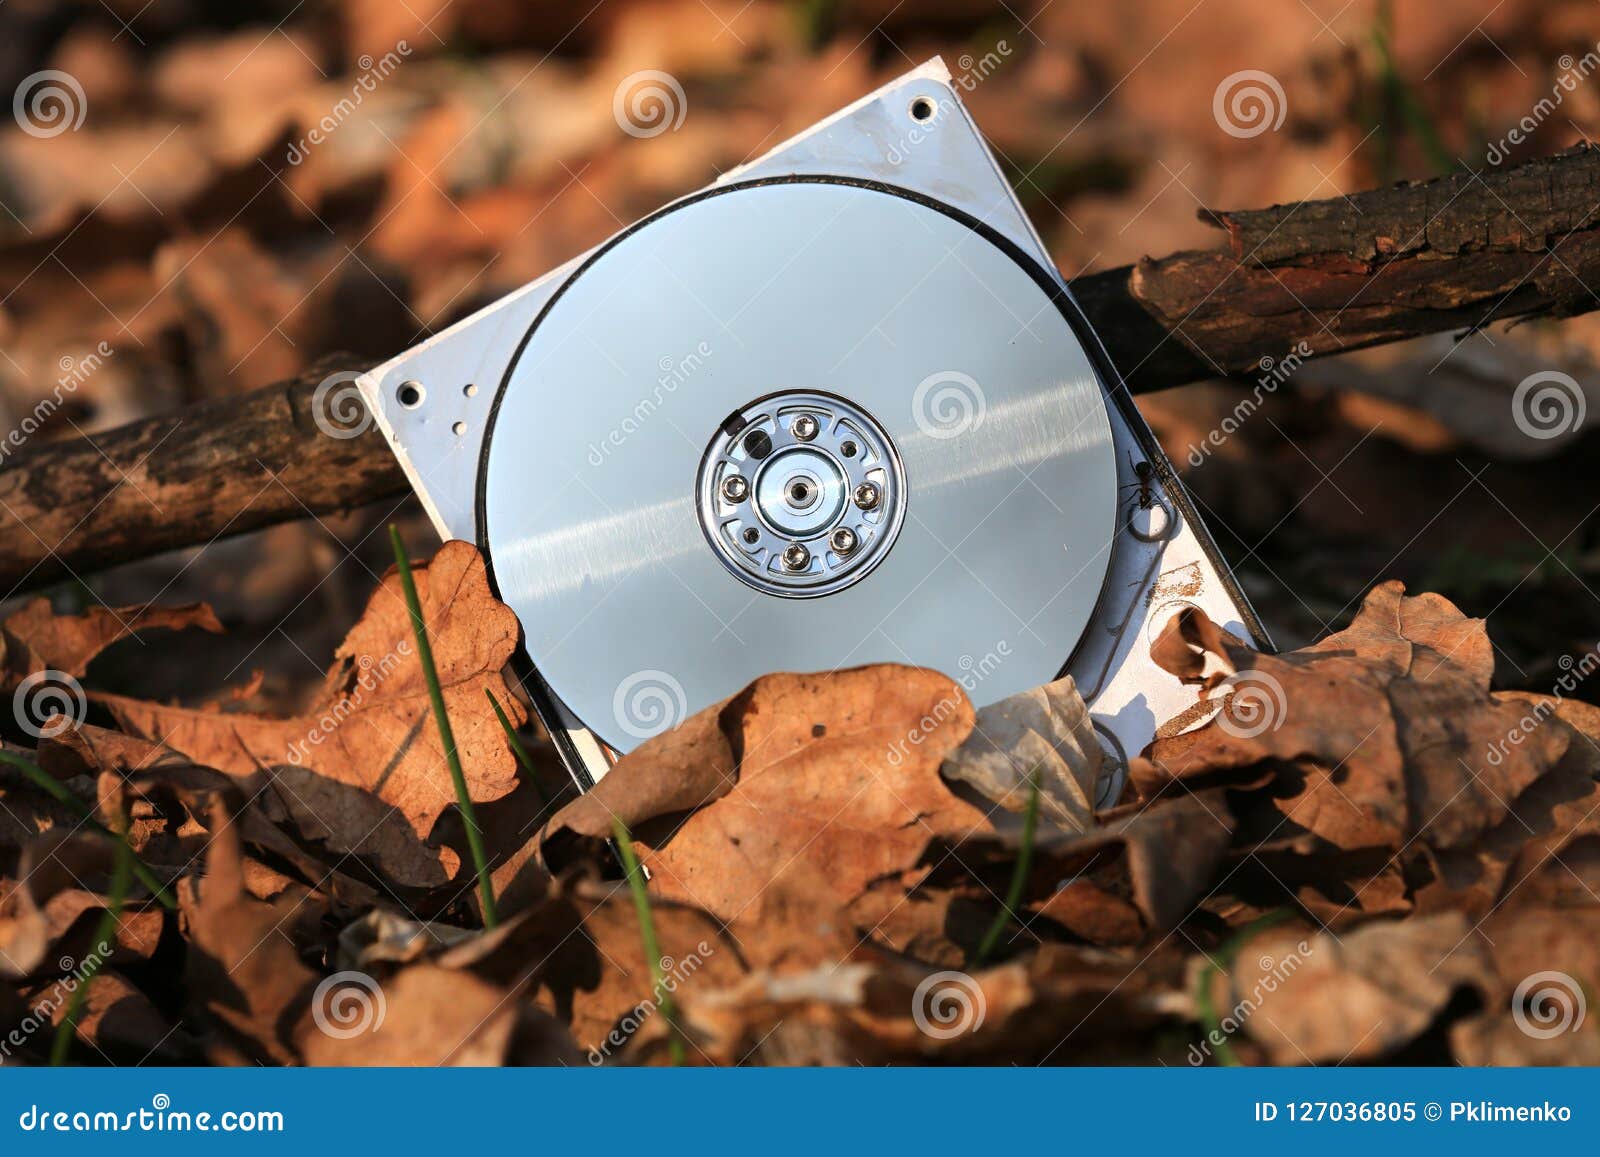 computer hard disk in autumn leafage in forest